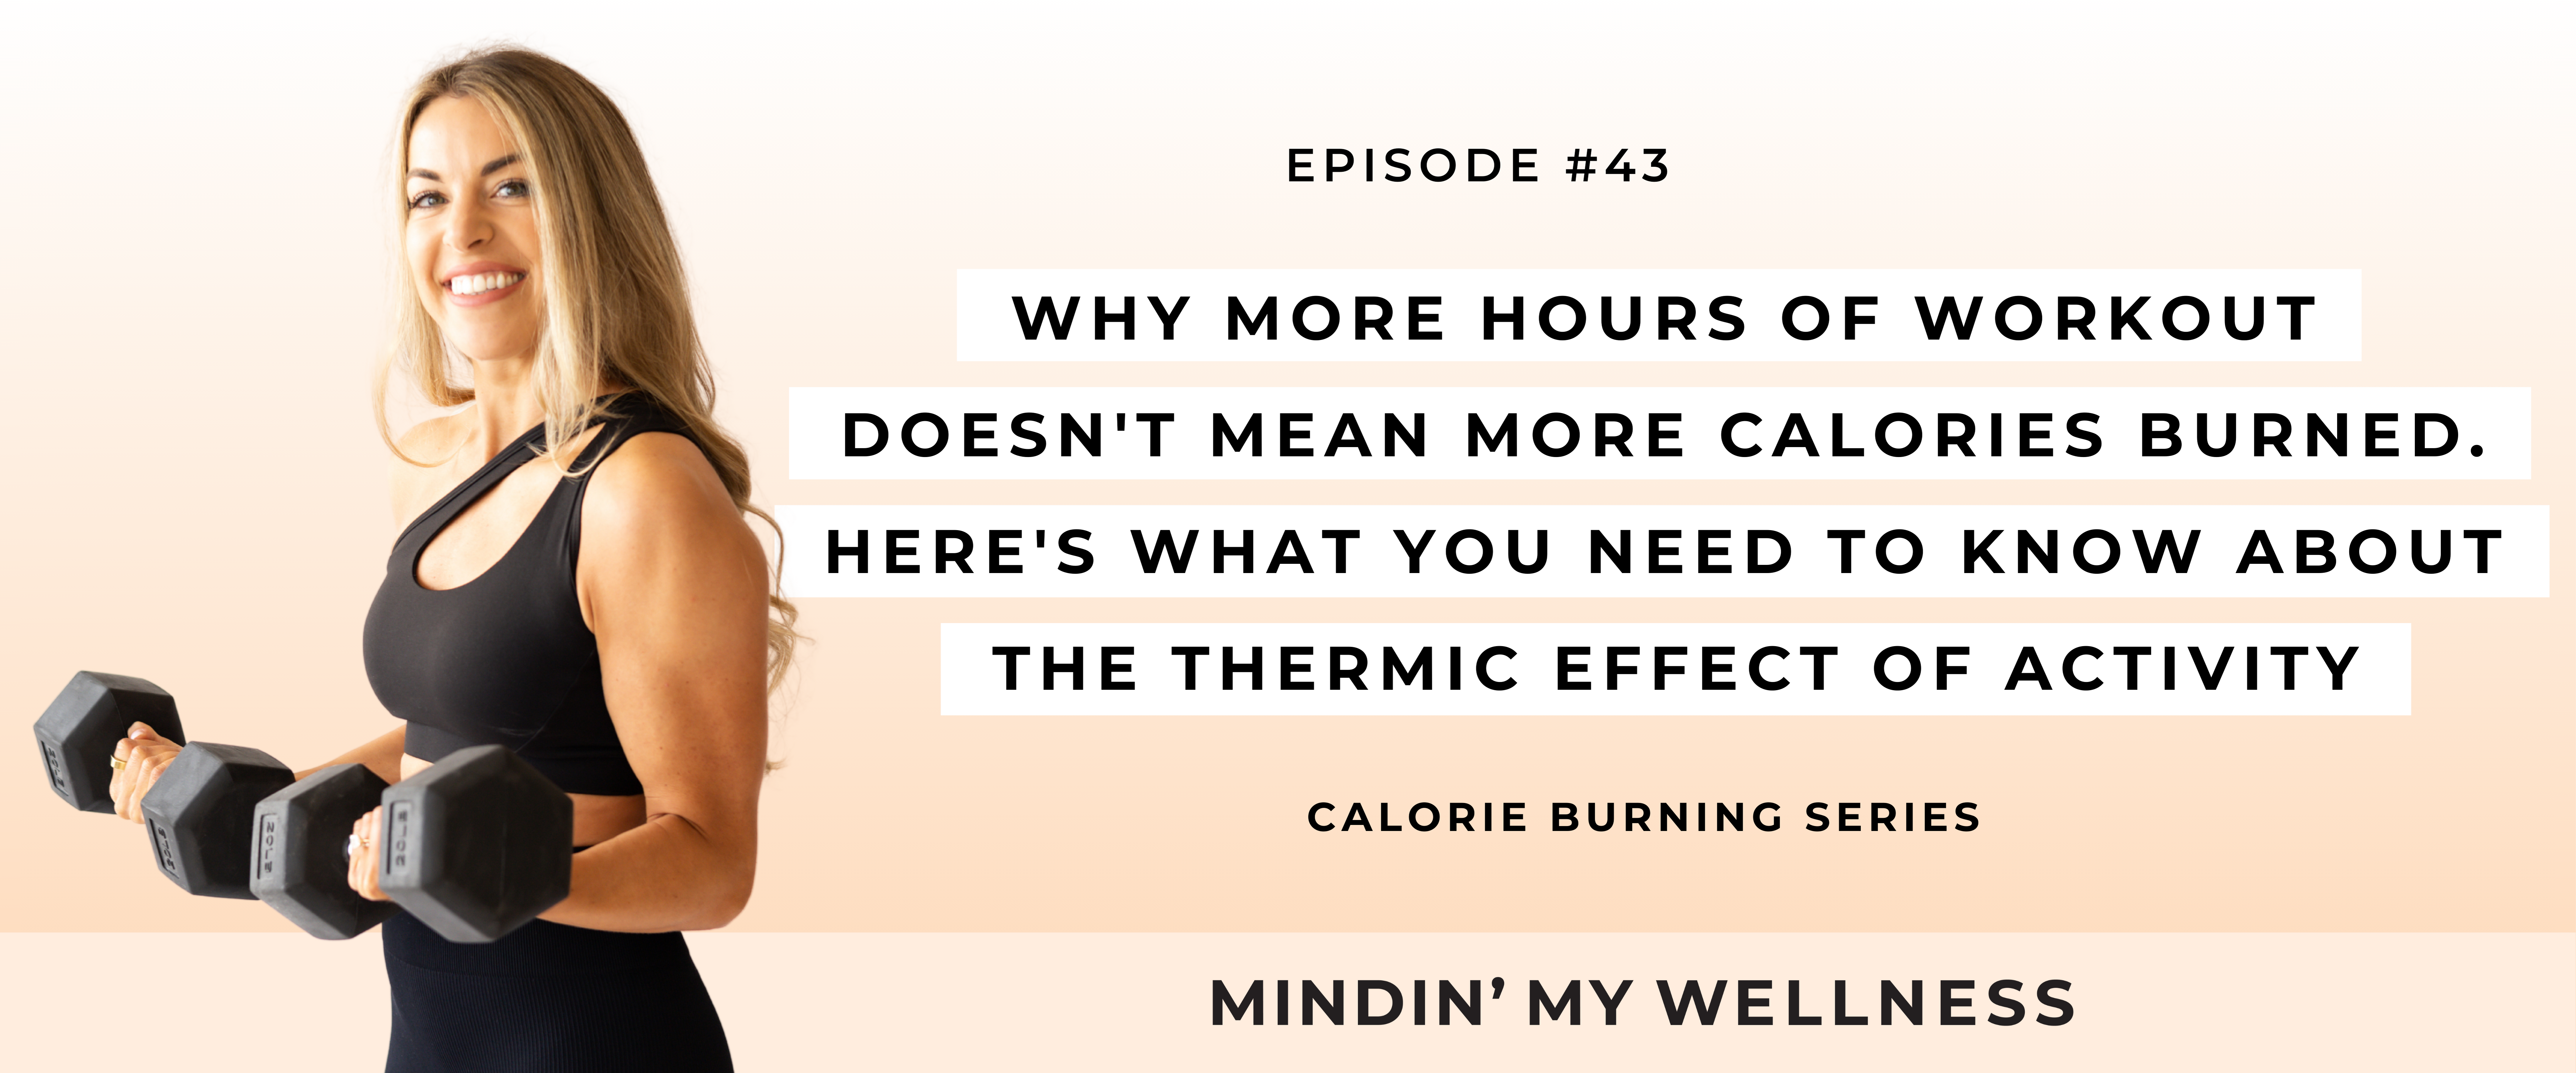 Why More Hours of Workout Doesn't Mean More Calories Burned. Here's What You Need To Know About the Thermic Effect of Activity | Calorie Burning Series